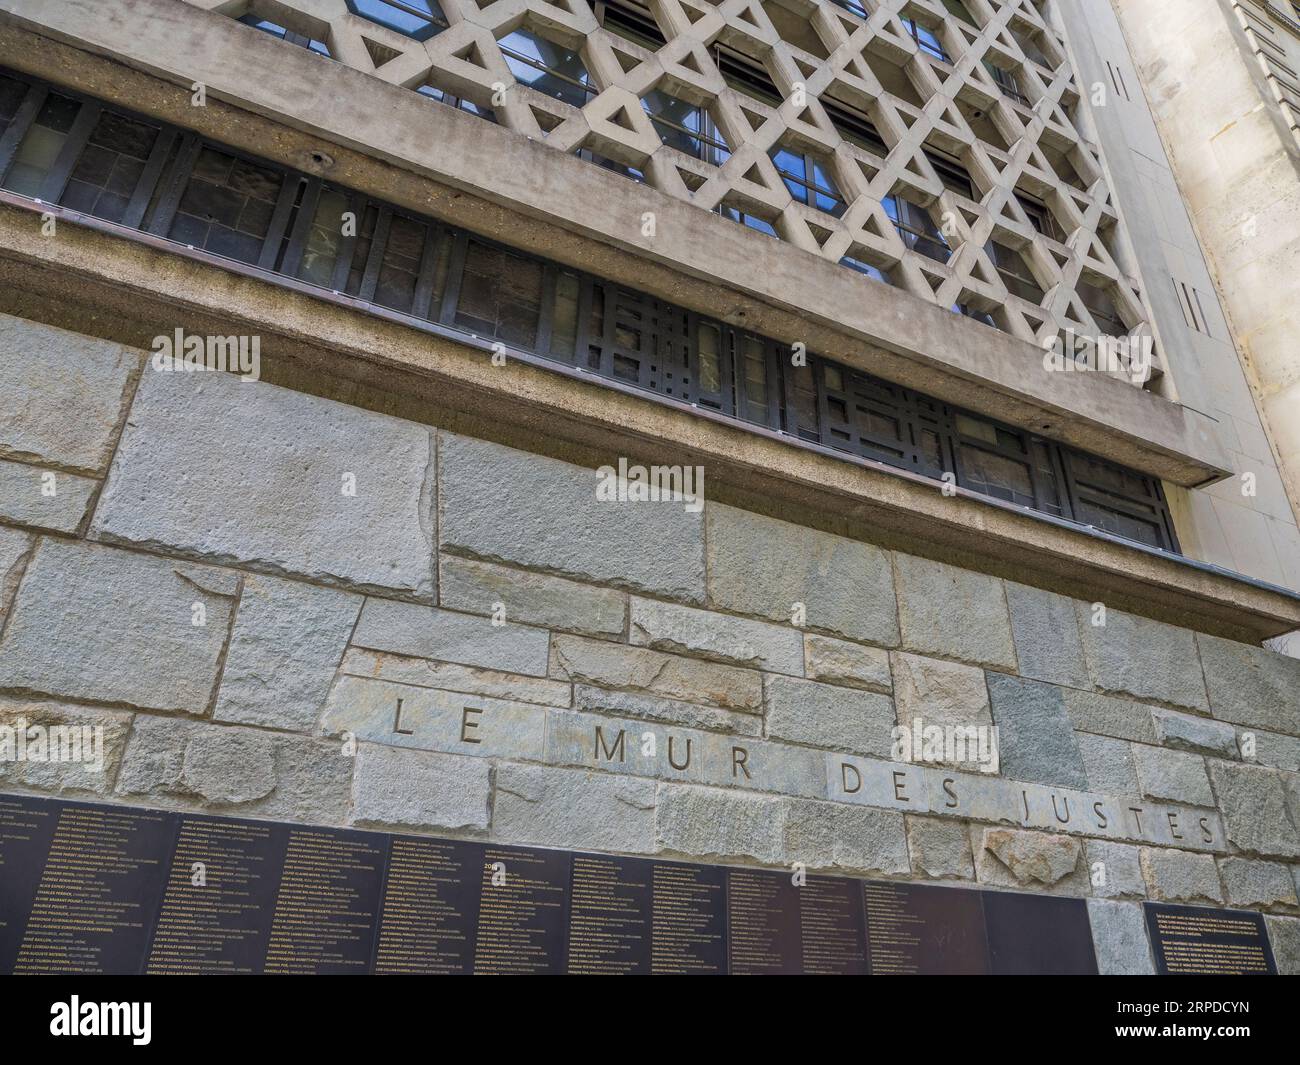 Le Mur des Justes, Memorial, Wall of Jewish Dead from 2nd World War, and Concentration Camps, Paris, France, Europe, EU. Stock Photo